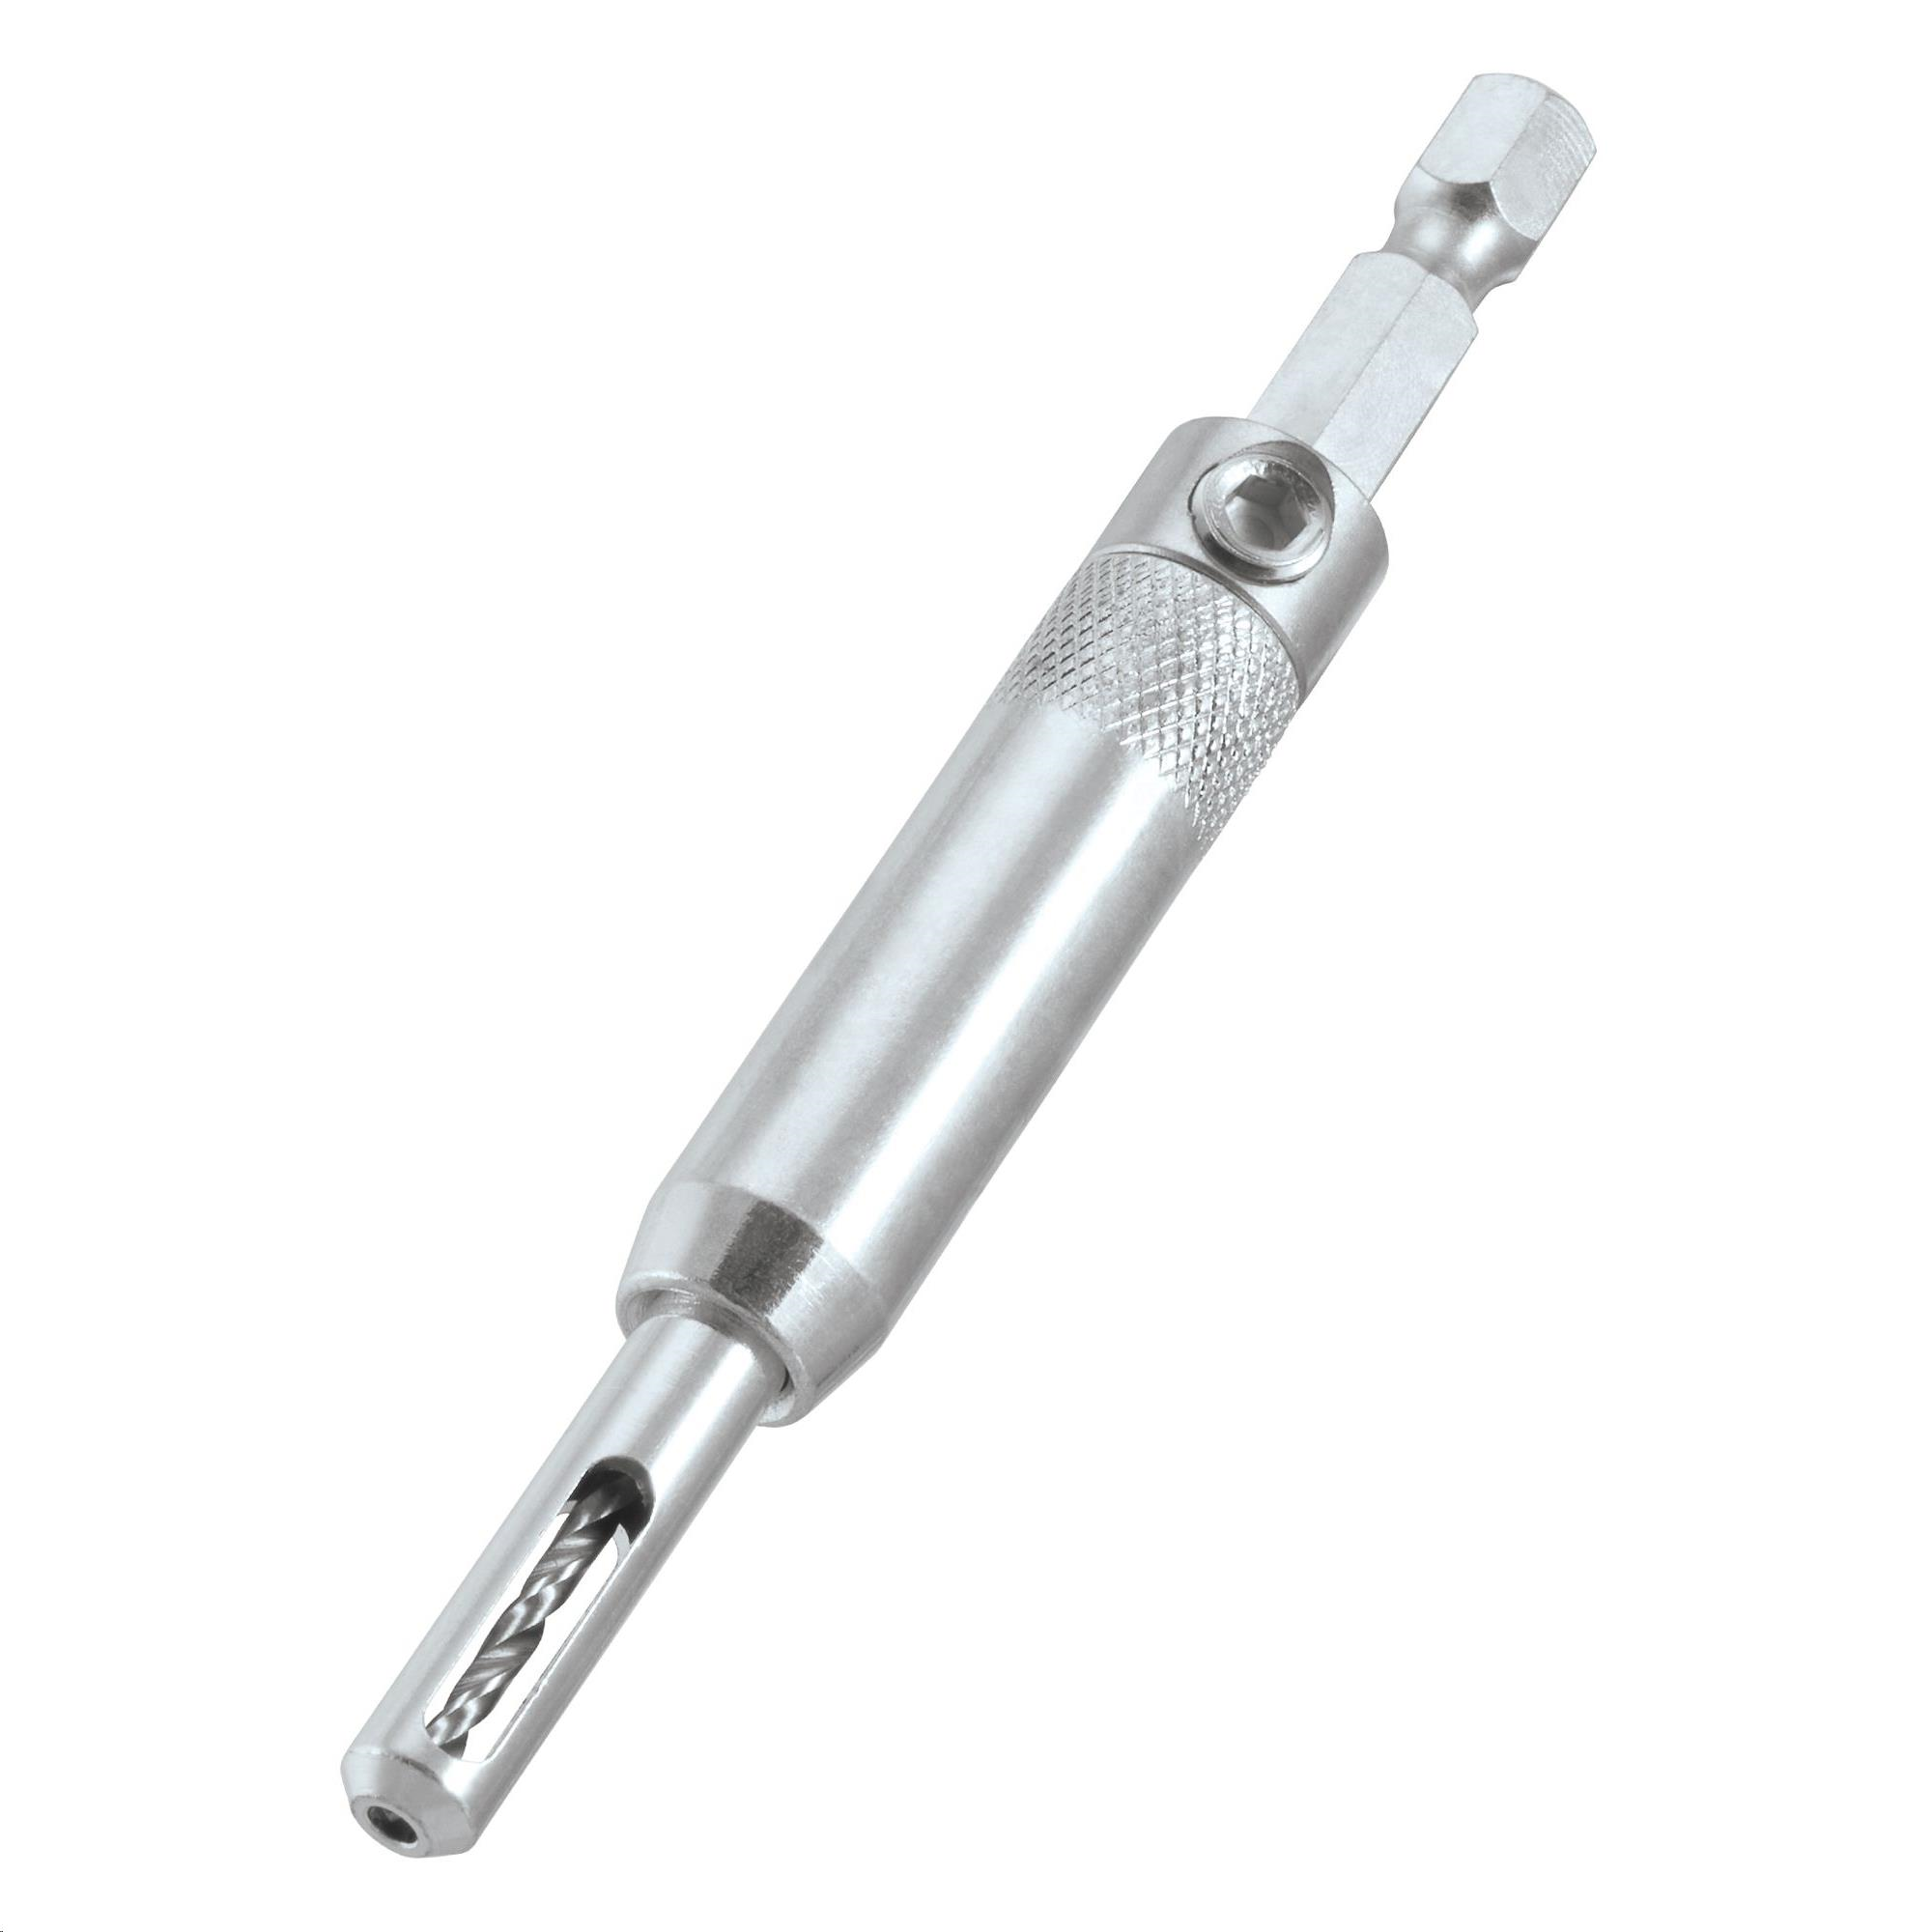 TREND SNAPPY CENTRING GUIDE 5/64" (2.00MM) DRILL